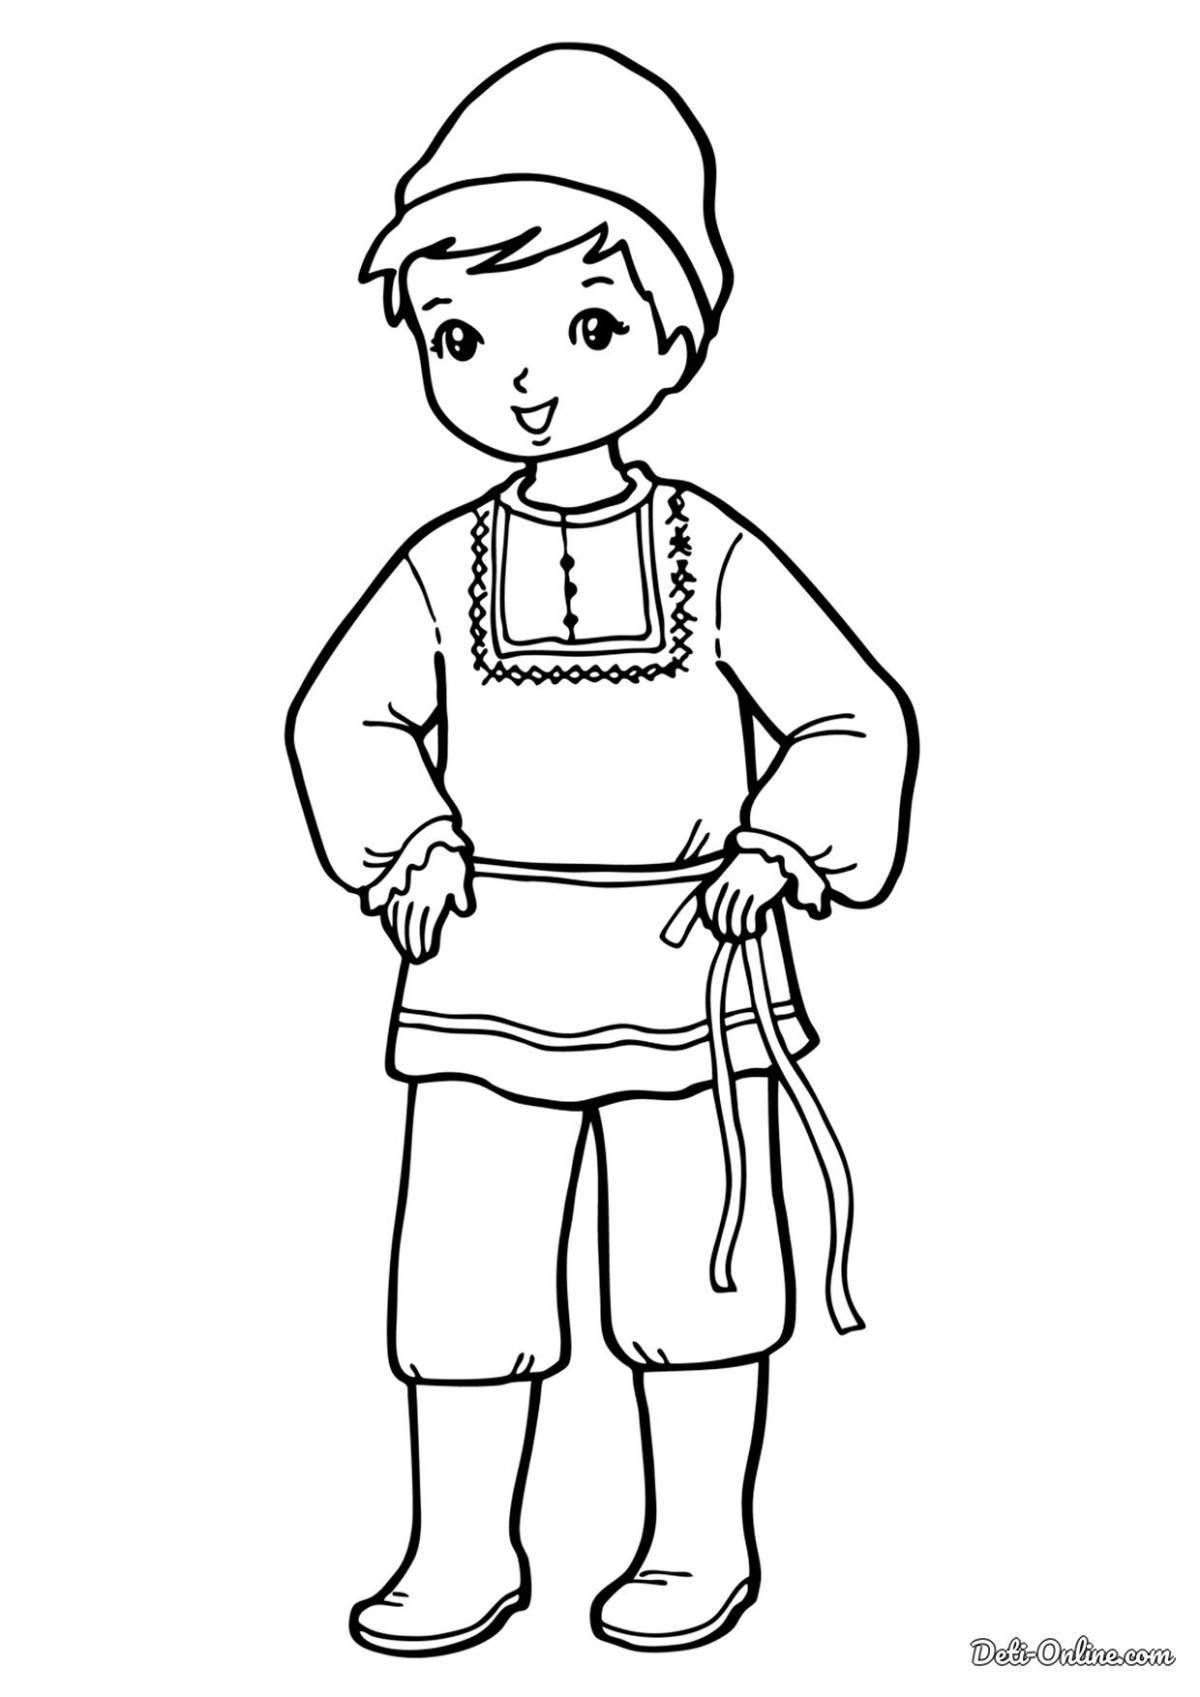 Coloring page graceful belarusian doll